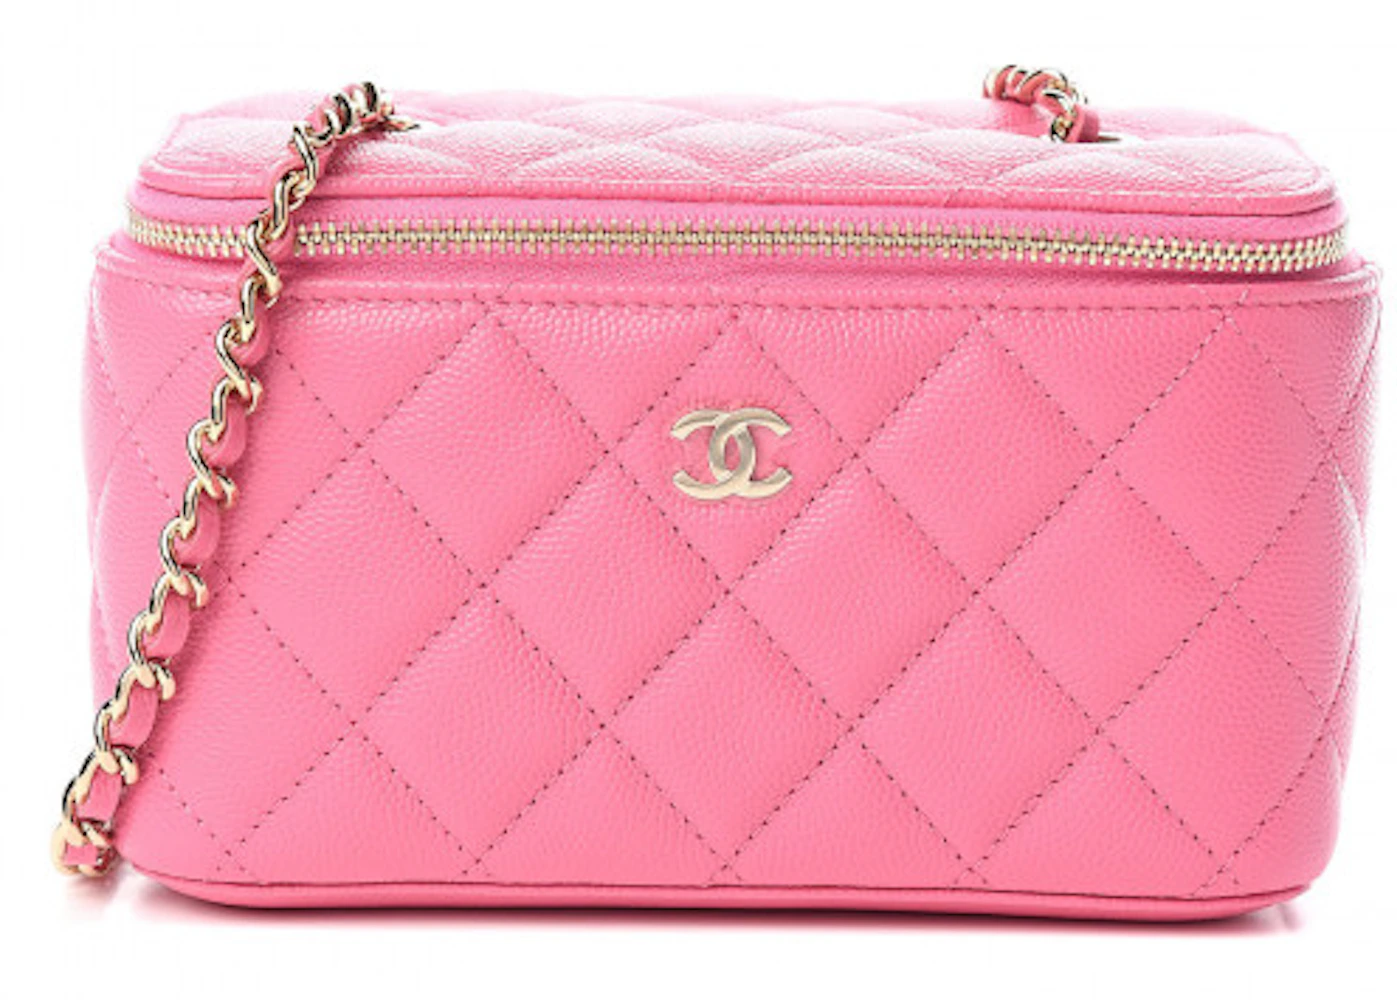 Chanel Vanity Case Bag Small 22S Calfskin Coral Pink